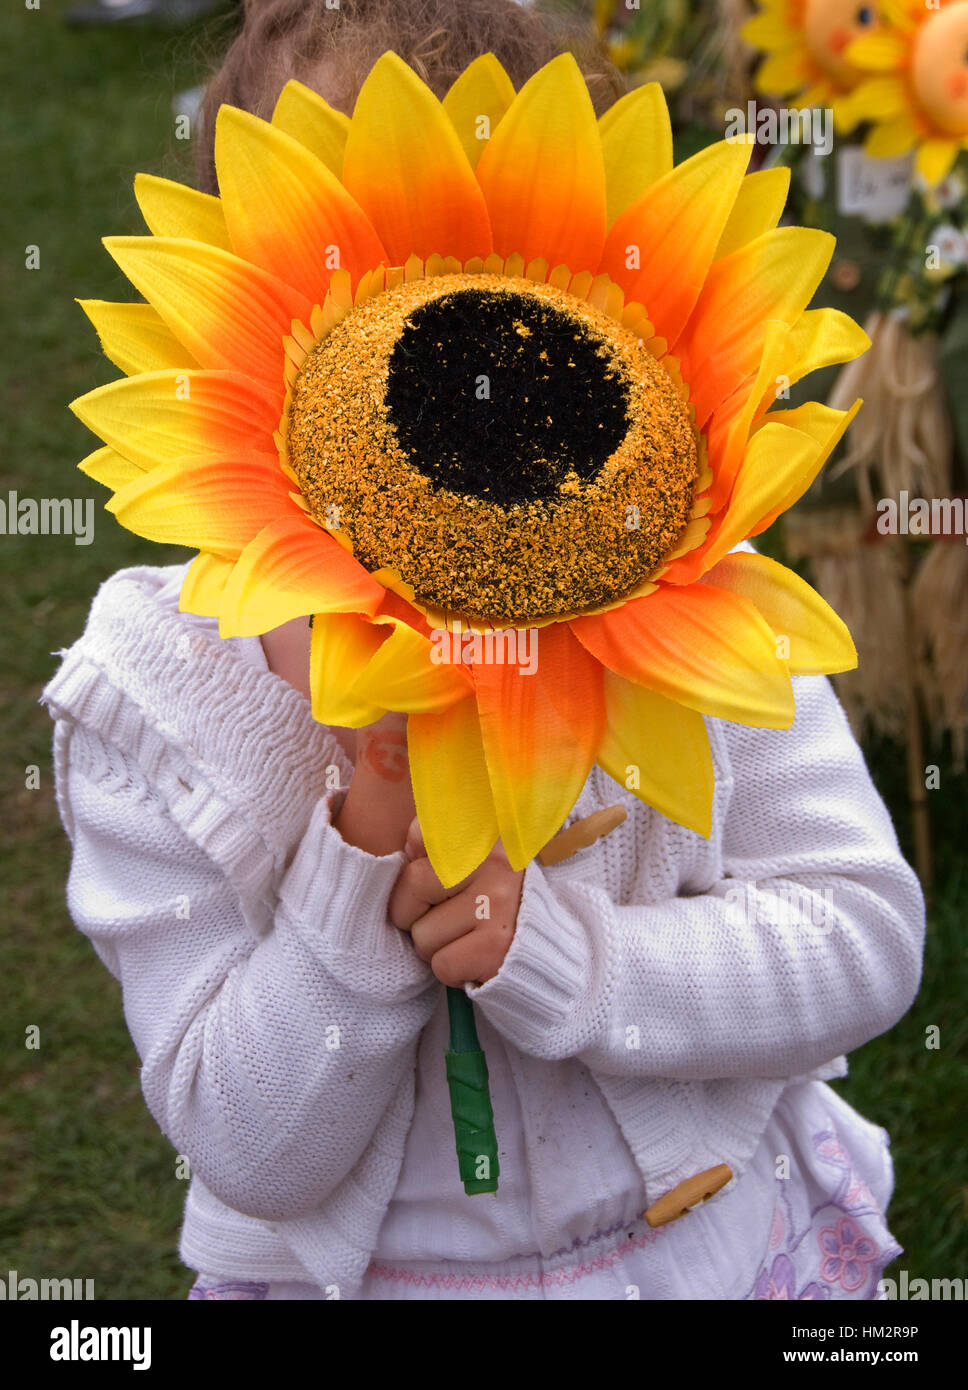 A small girl holding a giant sunflower over her face at the National Garden Show, Shepton Mallett Stock Photo